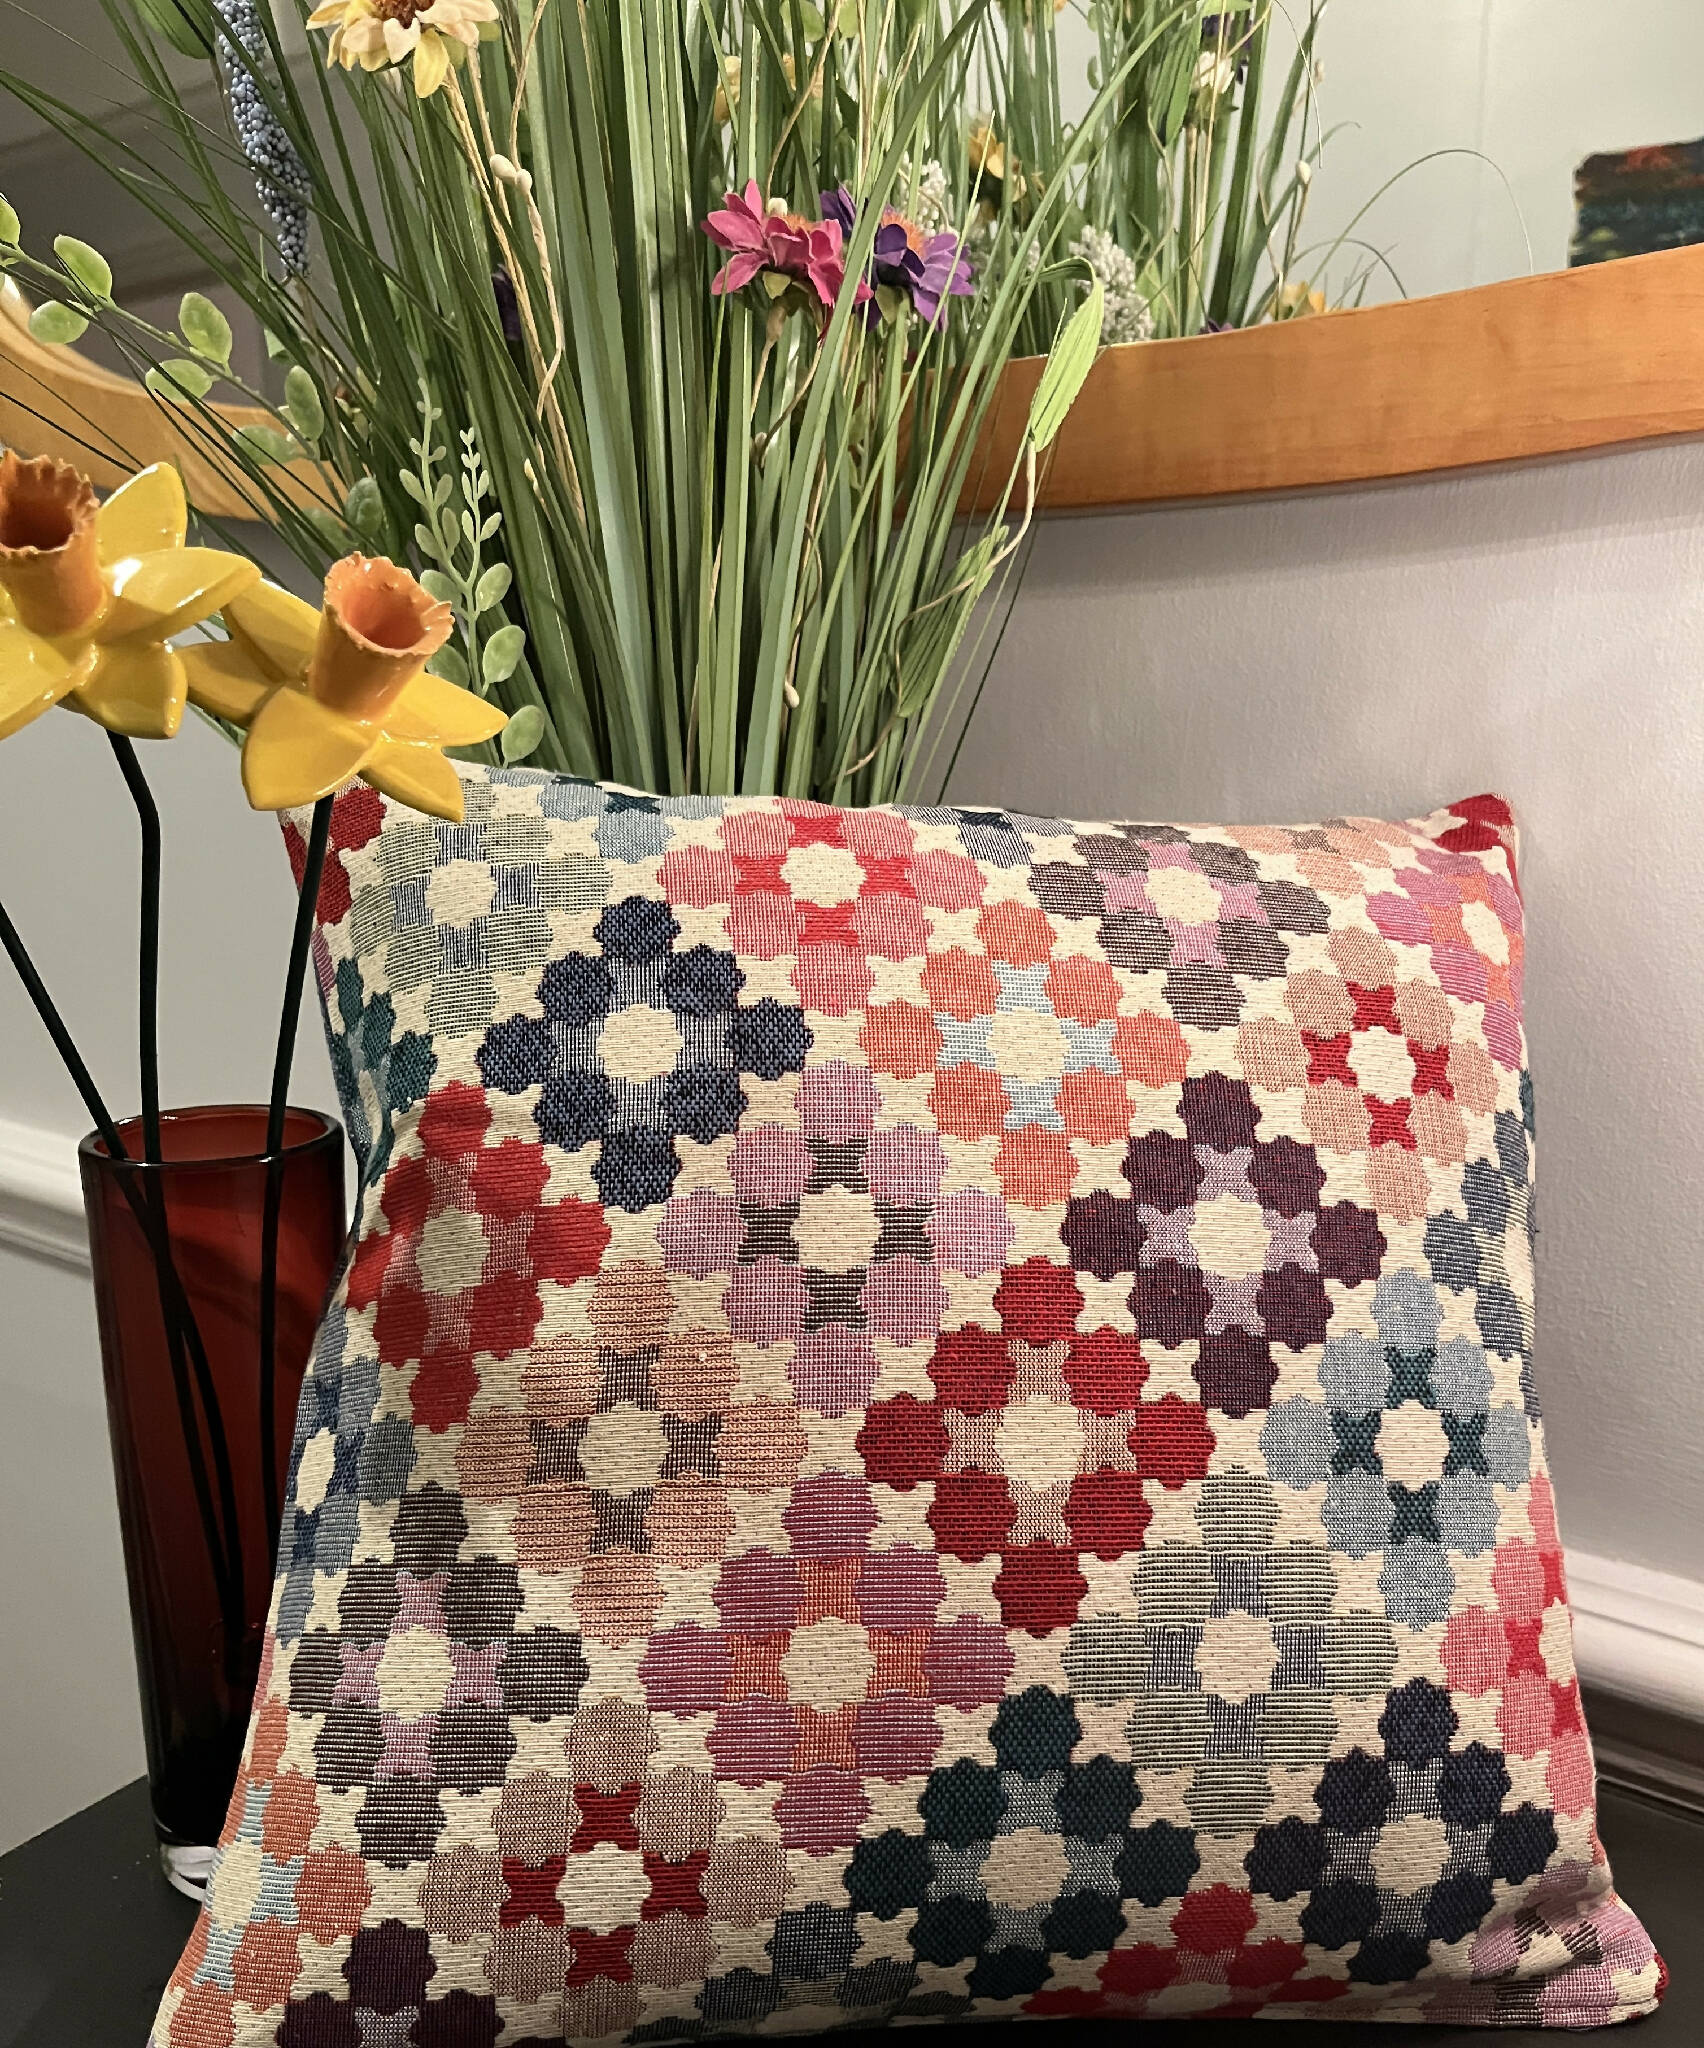 Crochet tapestry style cushion